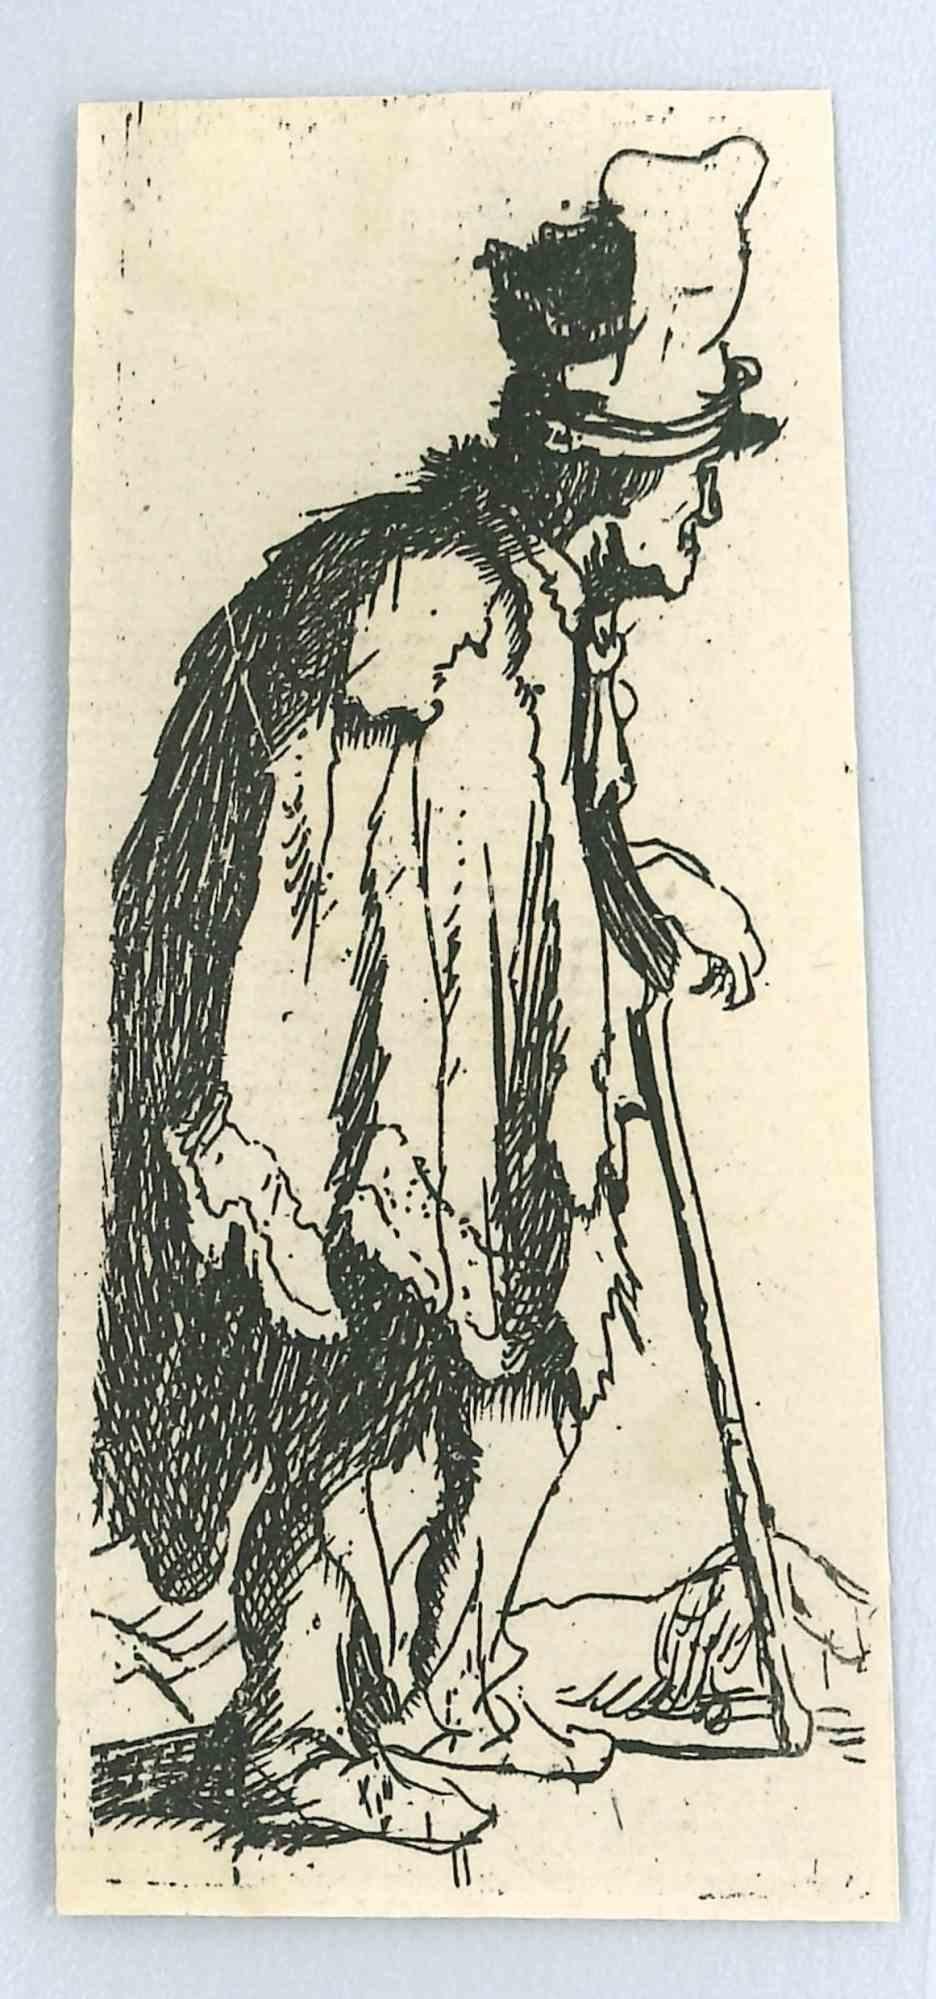 Charles Amand Durand Figurative Print - Beggar With A Crippled Hand Leaning On A Stick - Engraving after Rembrandt